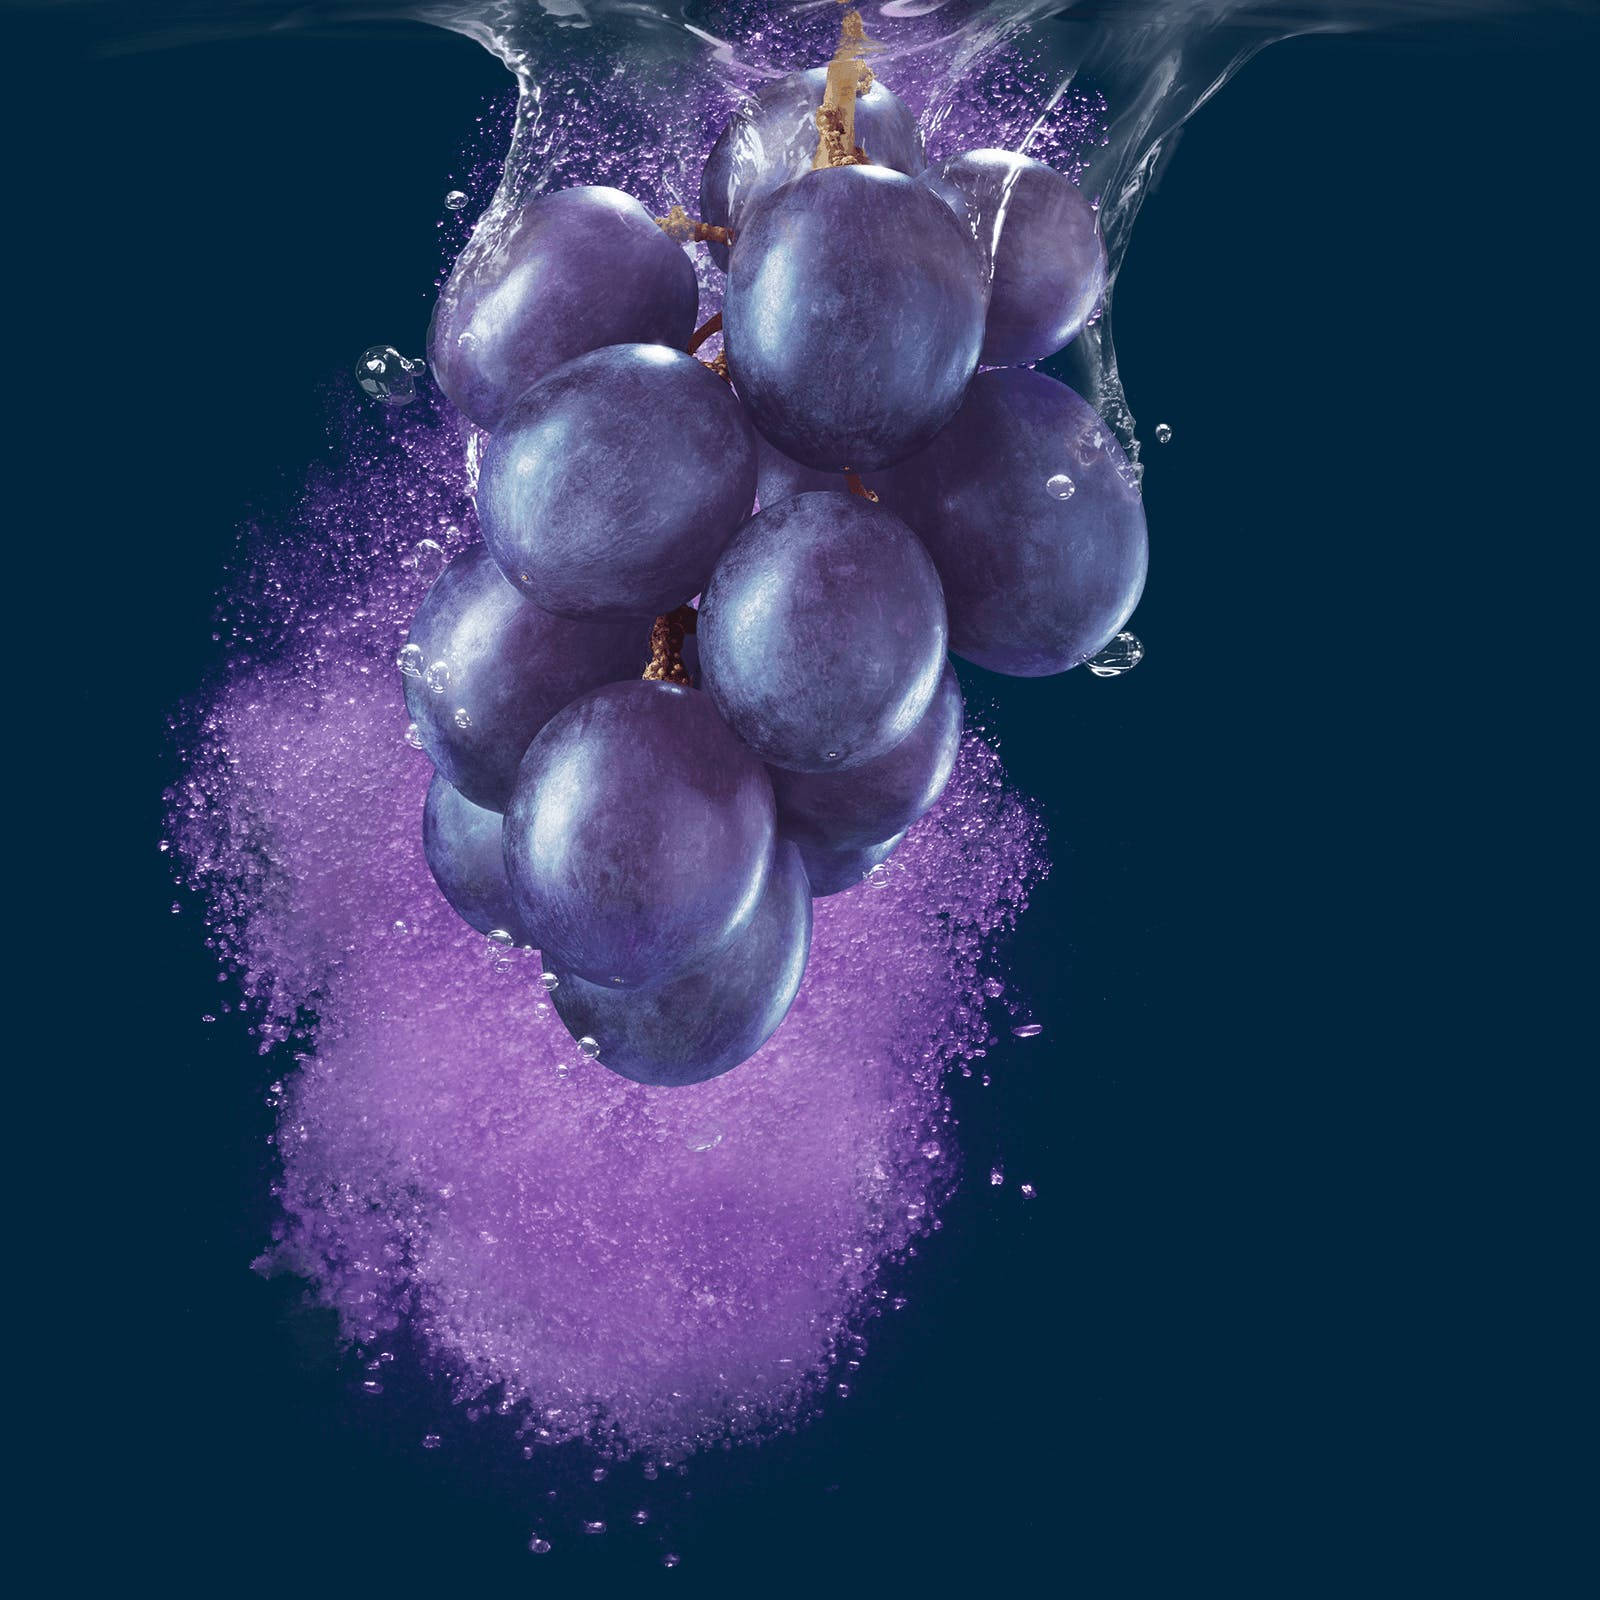 Grape Soaked On Water Wallpaper